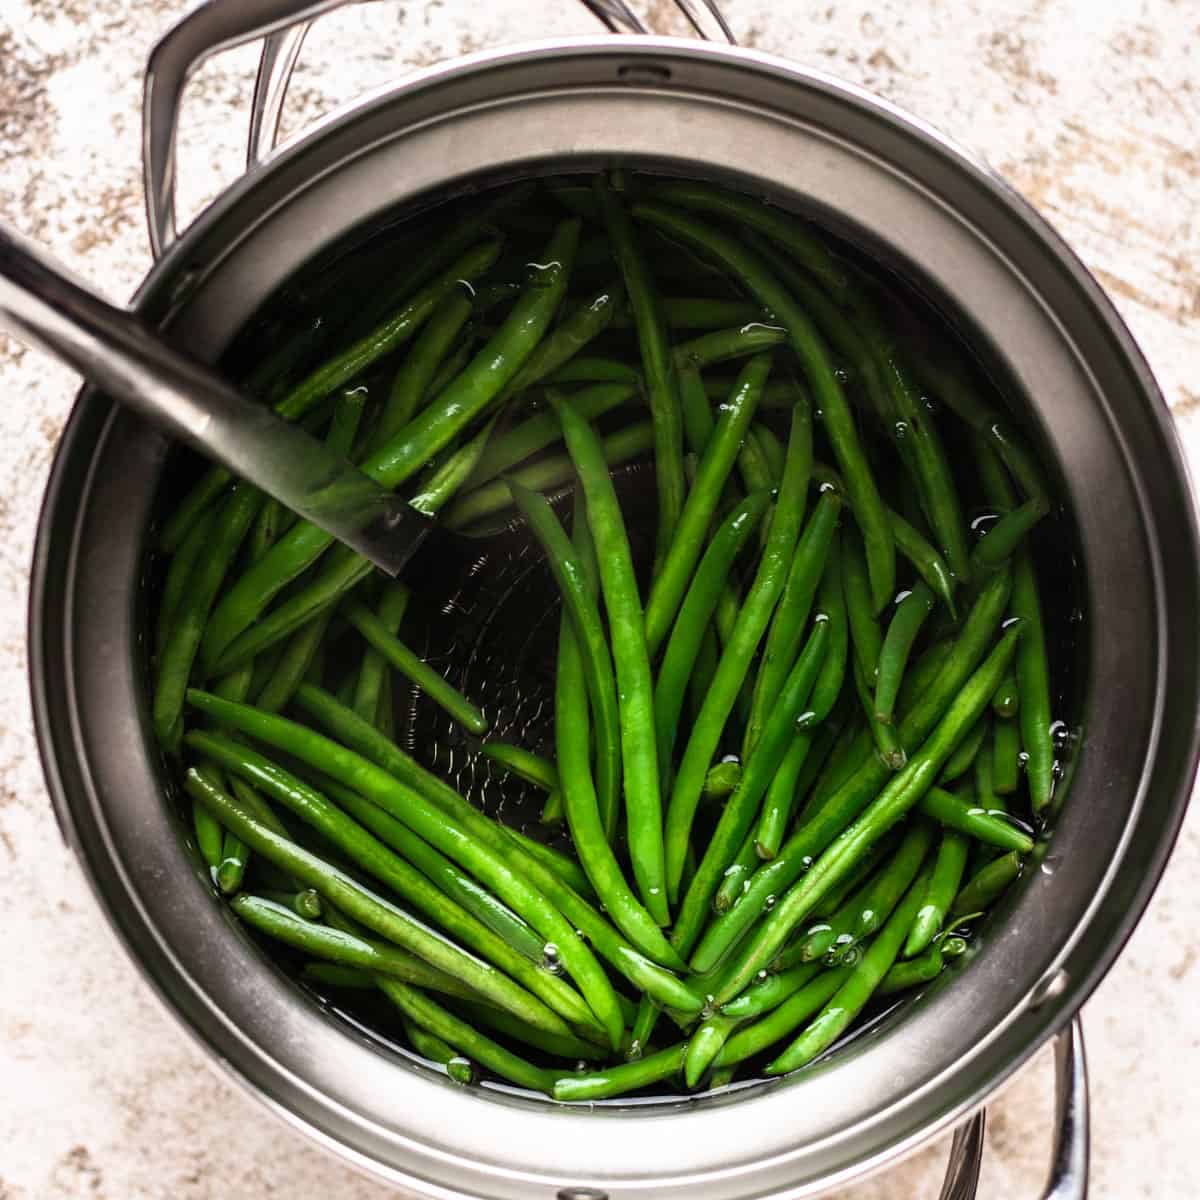 Cooking green beans in a large pot.